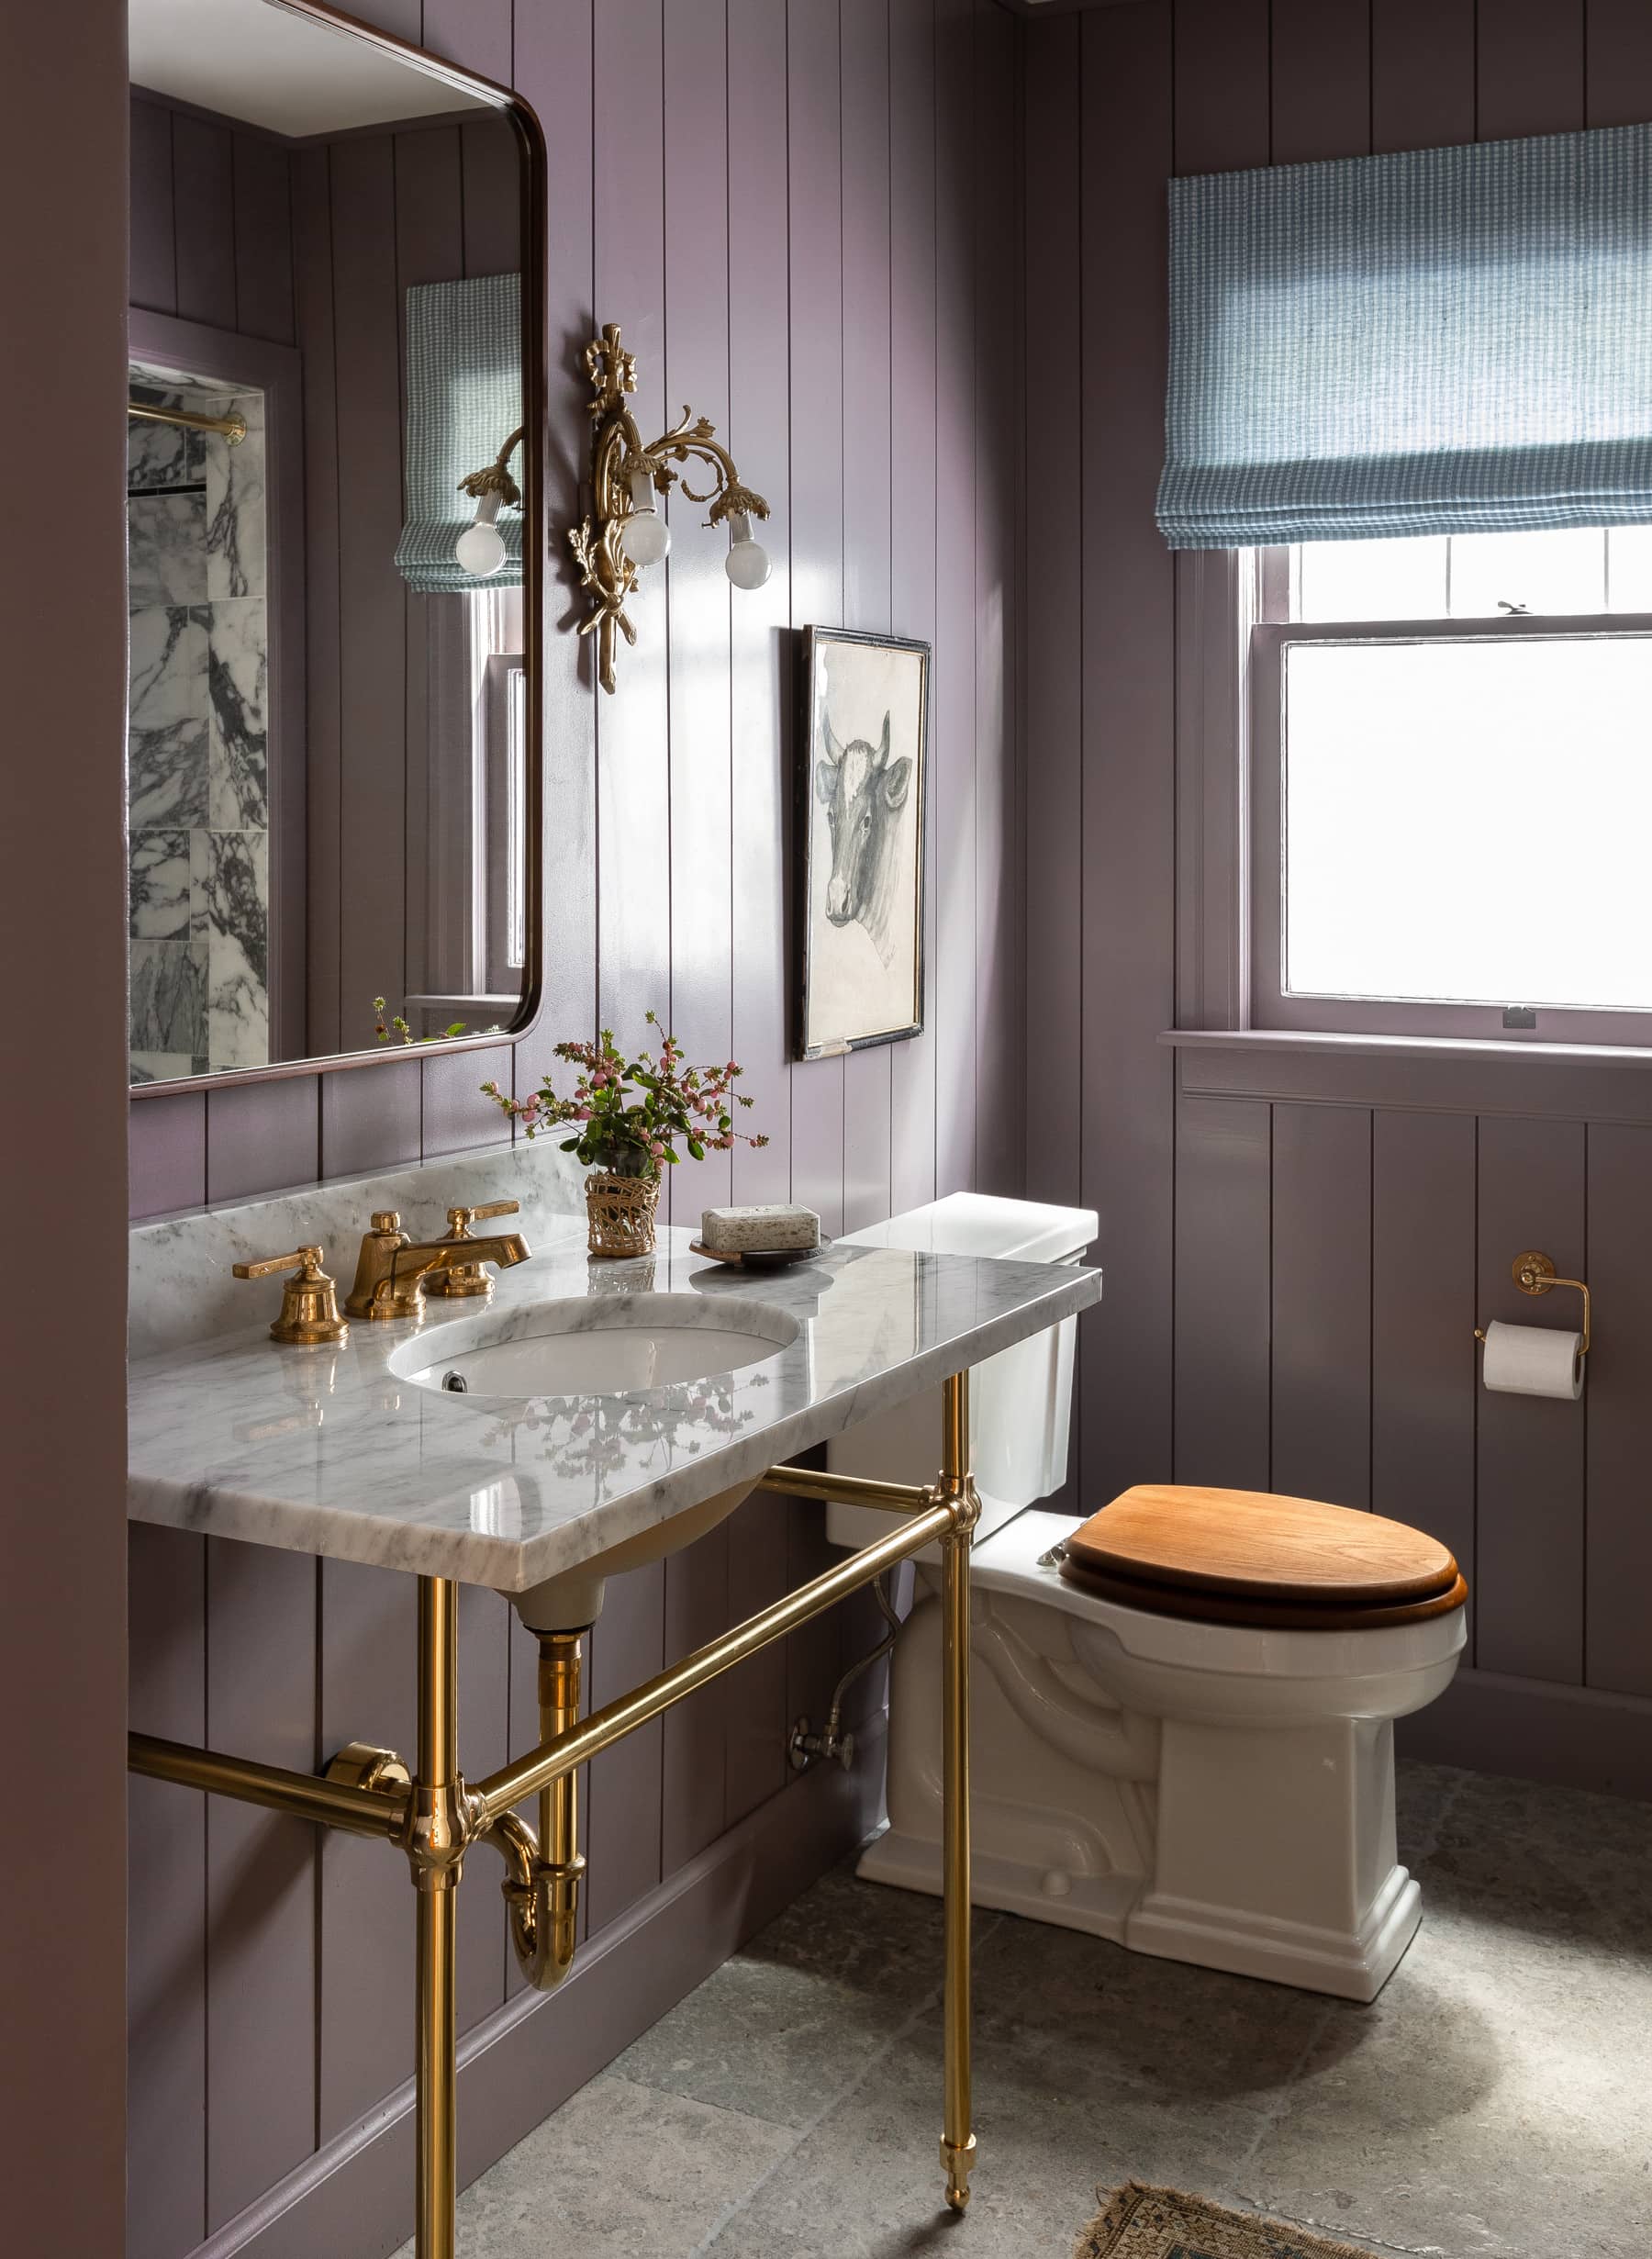 home tour featuring a vintage inspired cottage bathroom showcasing light purple walls